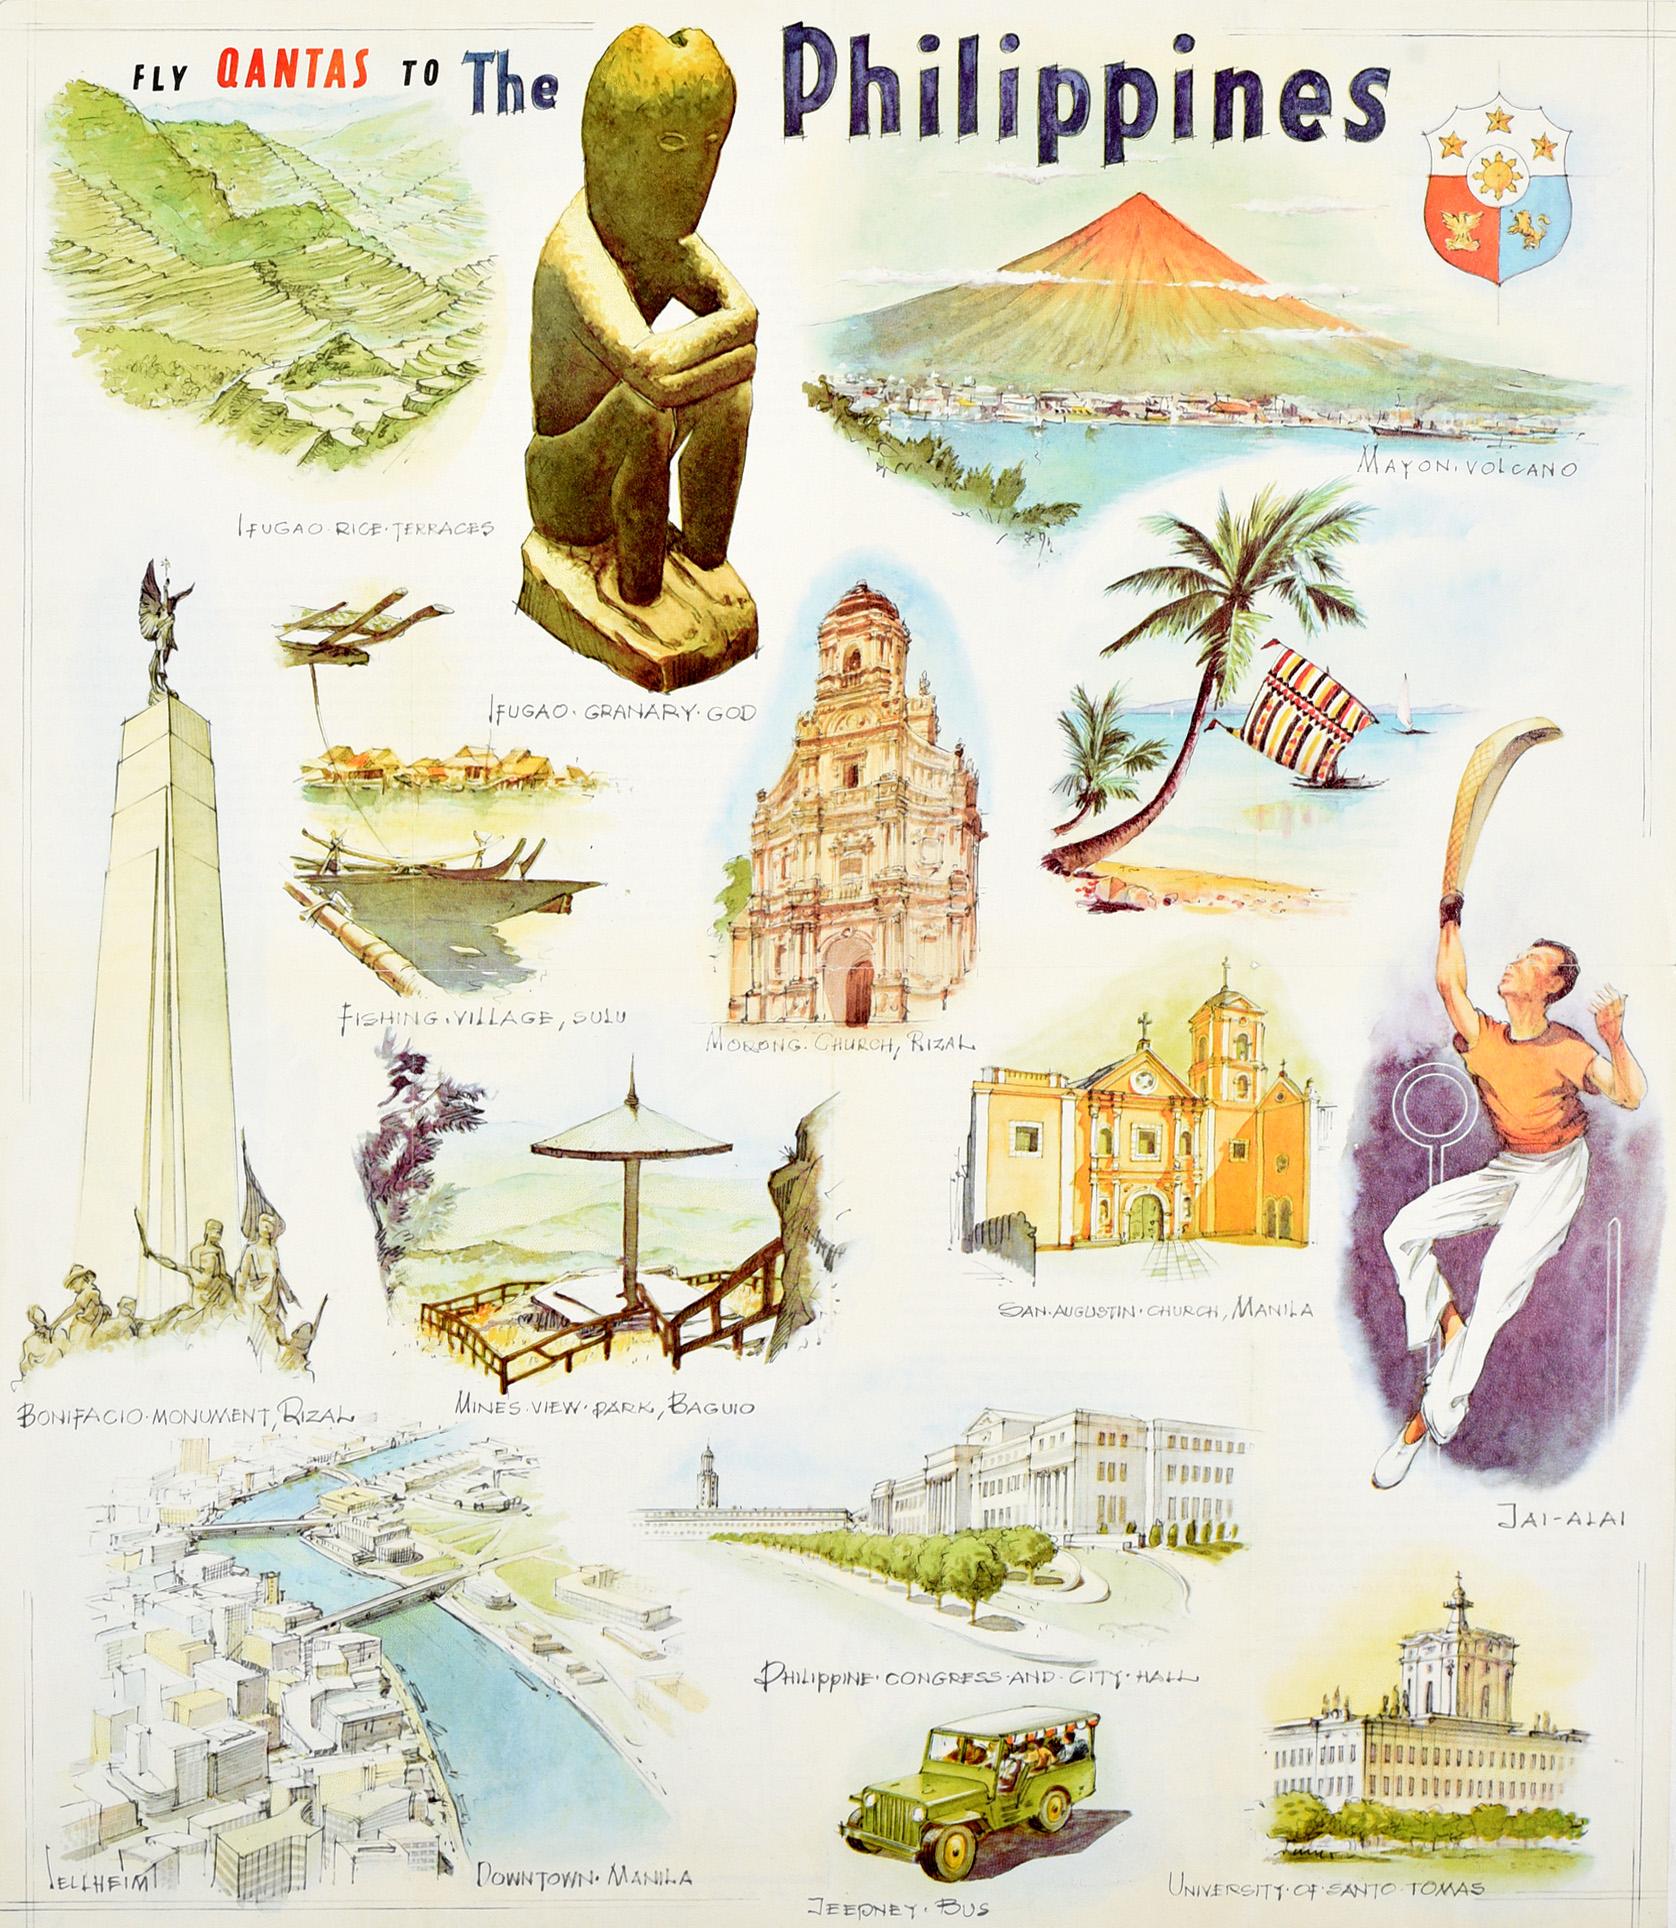 Unknown Print - Original Vintage Poster Fly Qantas To The Philippines Travel Art Illustrations